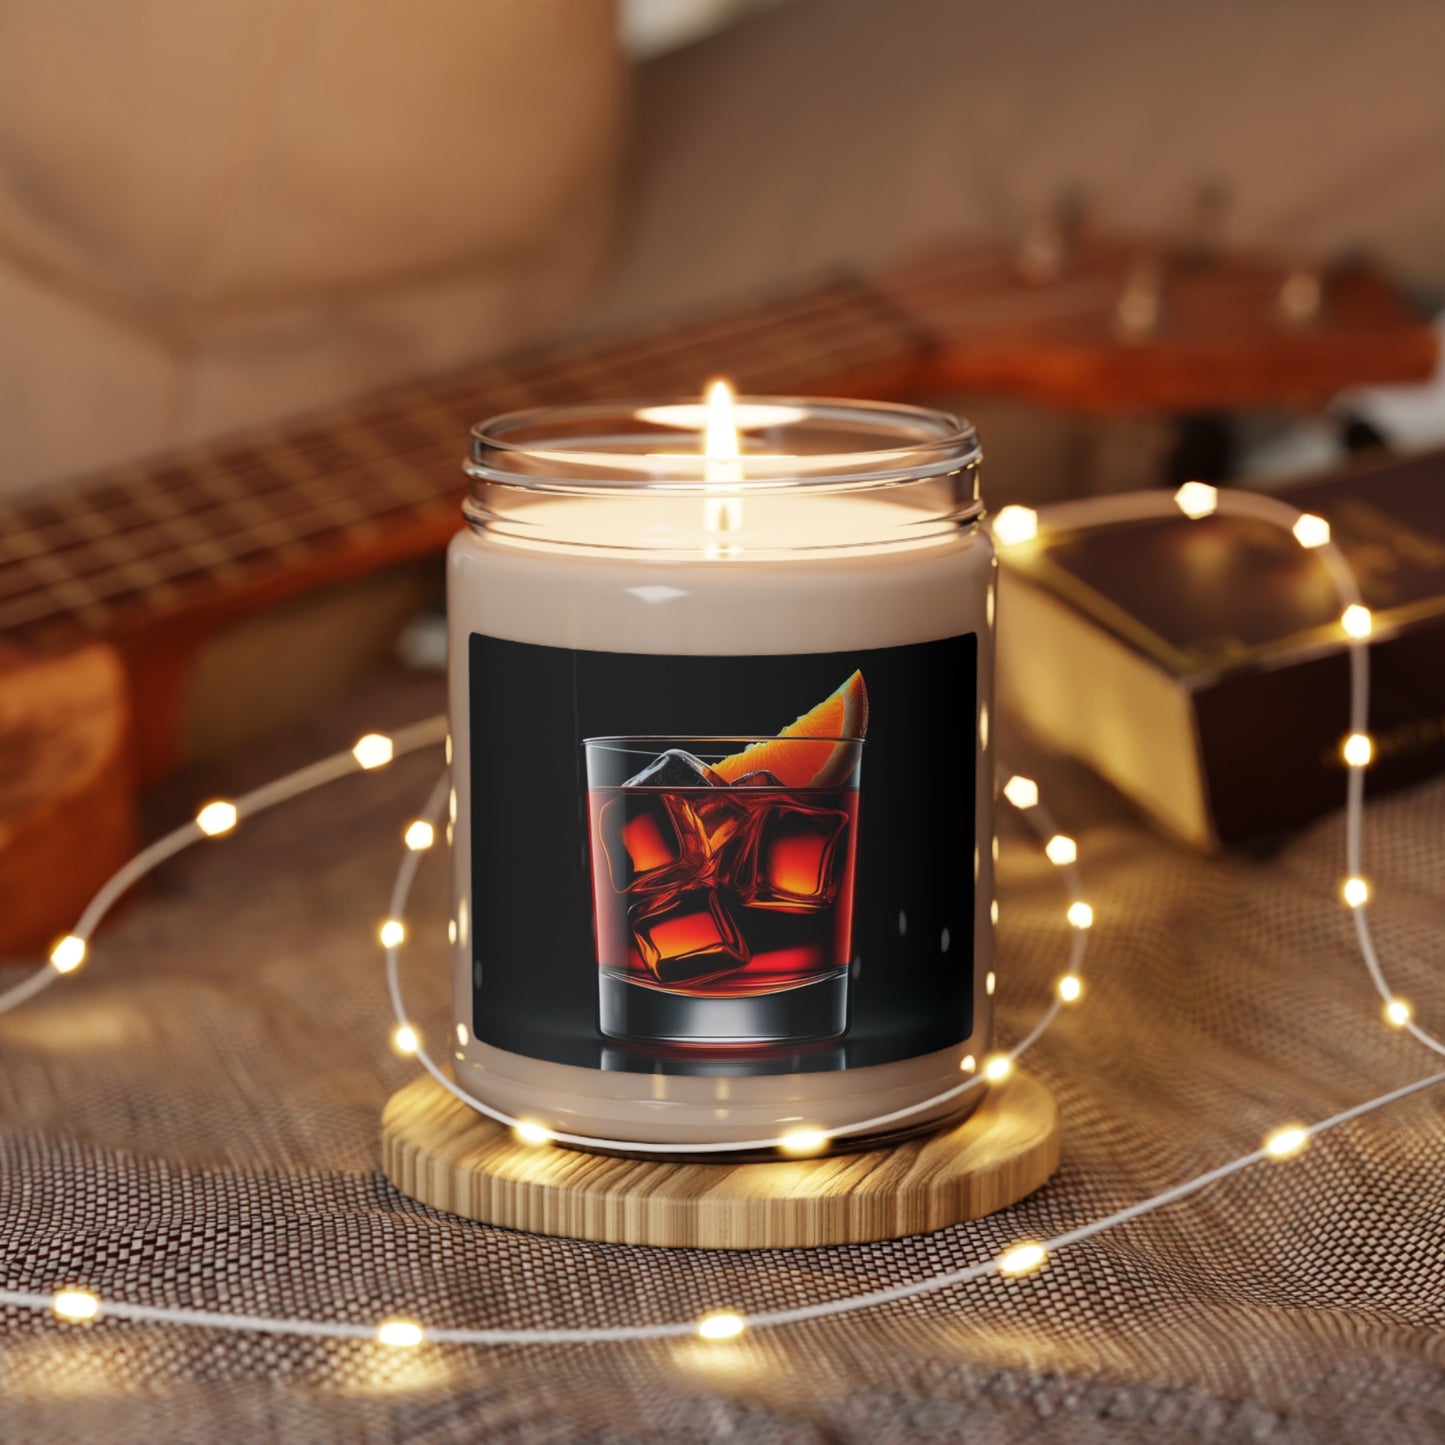 Scented Soy Candle With Negroni Image, 9oz